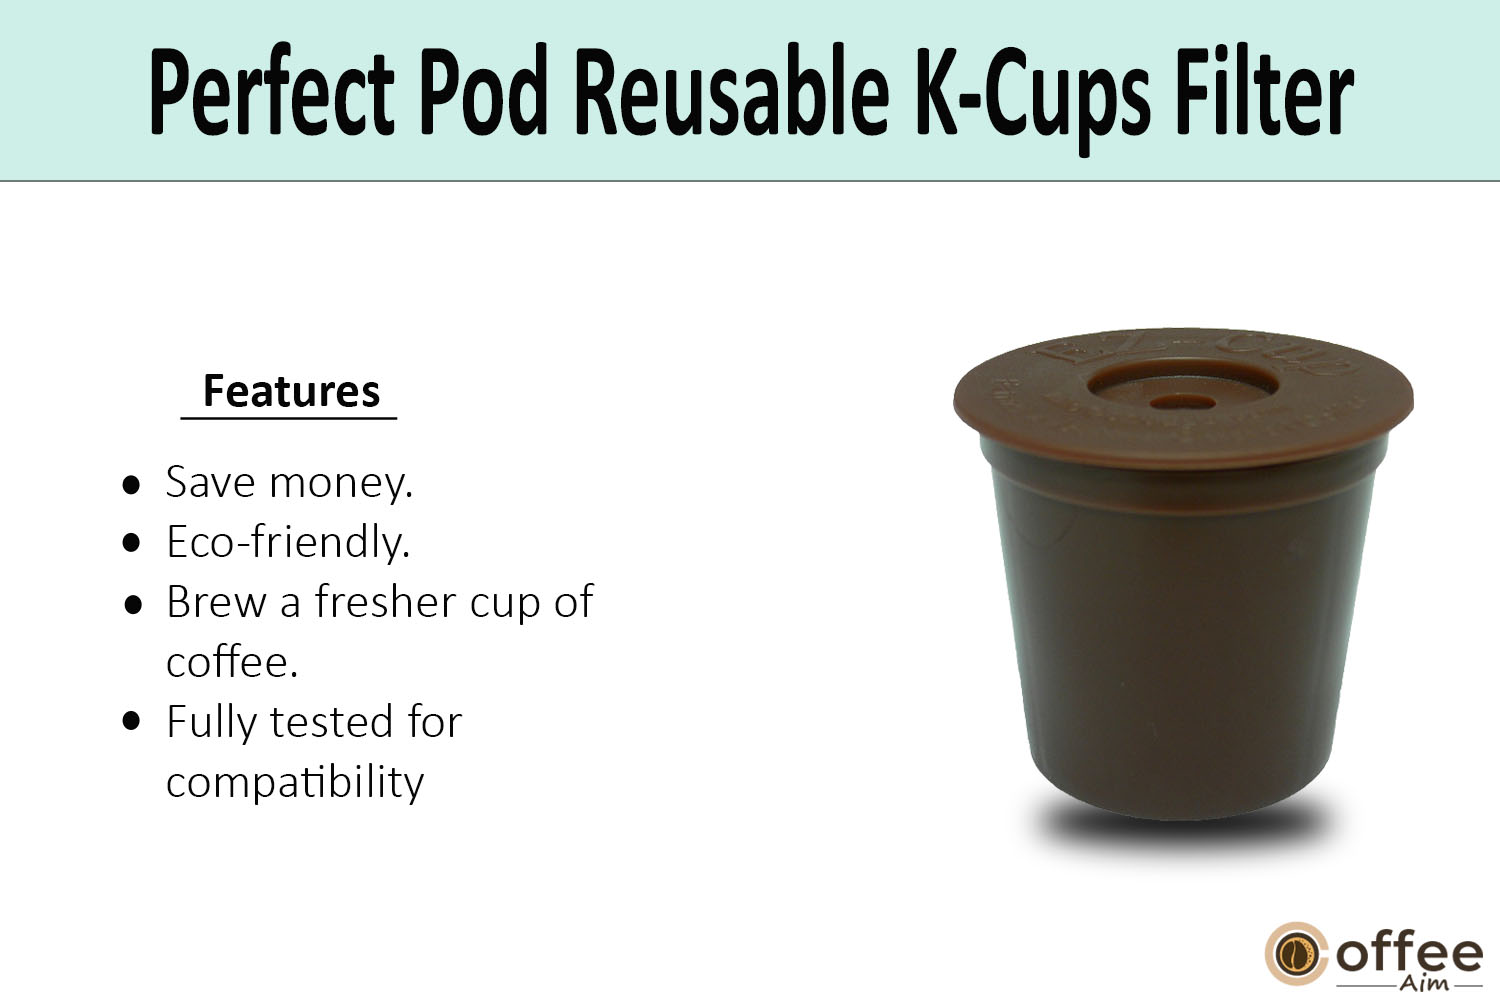 In this image, I elucidate the features of perfect pod reusable K-Cup  coffee filter